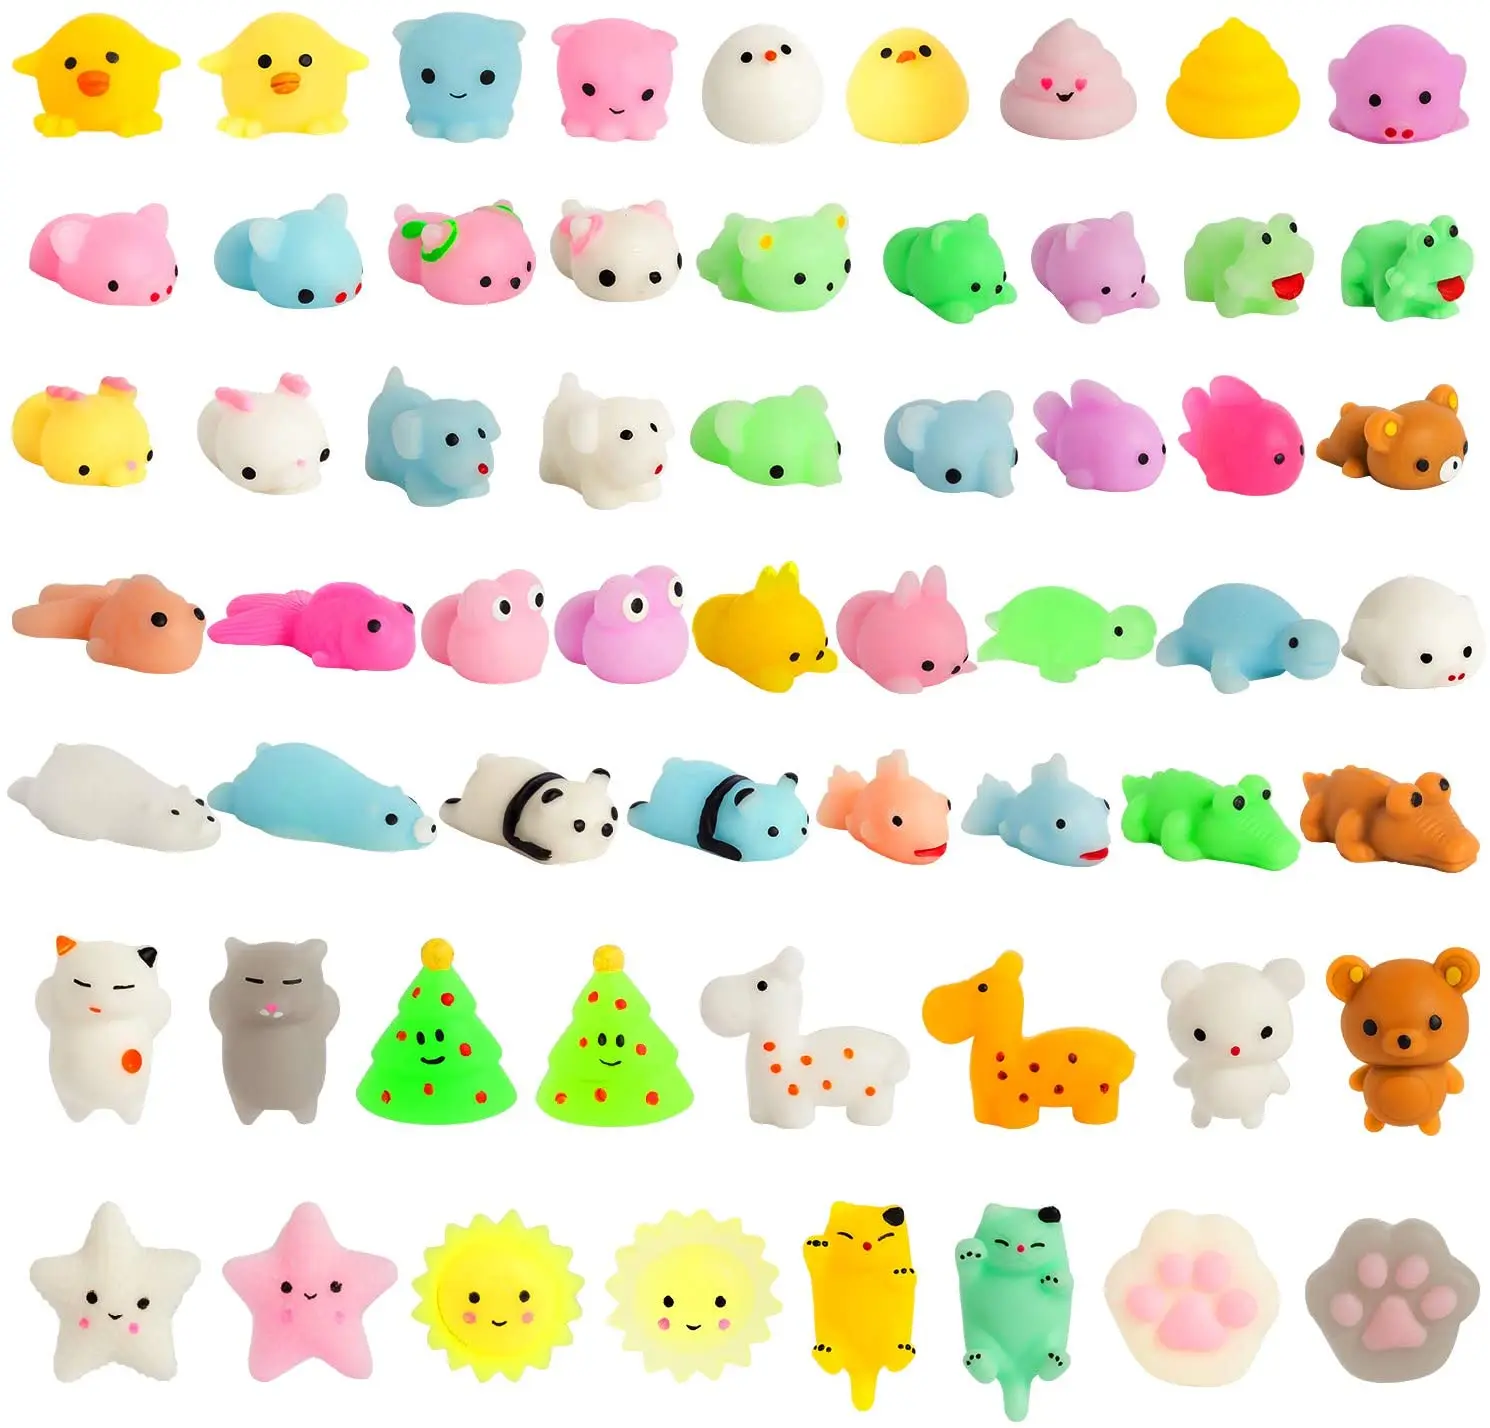 Squishy Toys Perfect Party Favors Classroom Prize,Preschool Educational Toys Squishy Sensory Animal Flip Toys for Kids